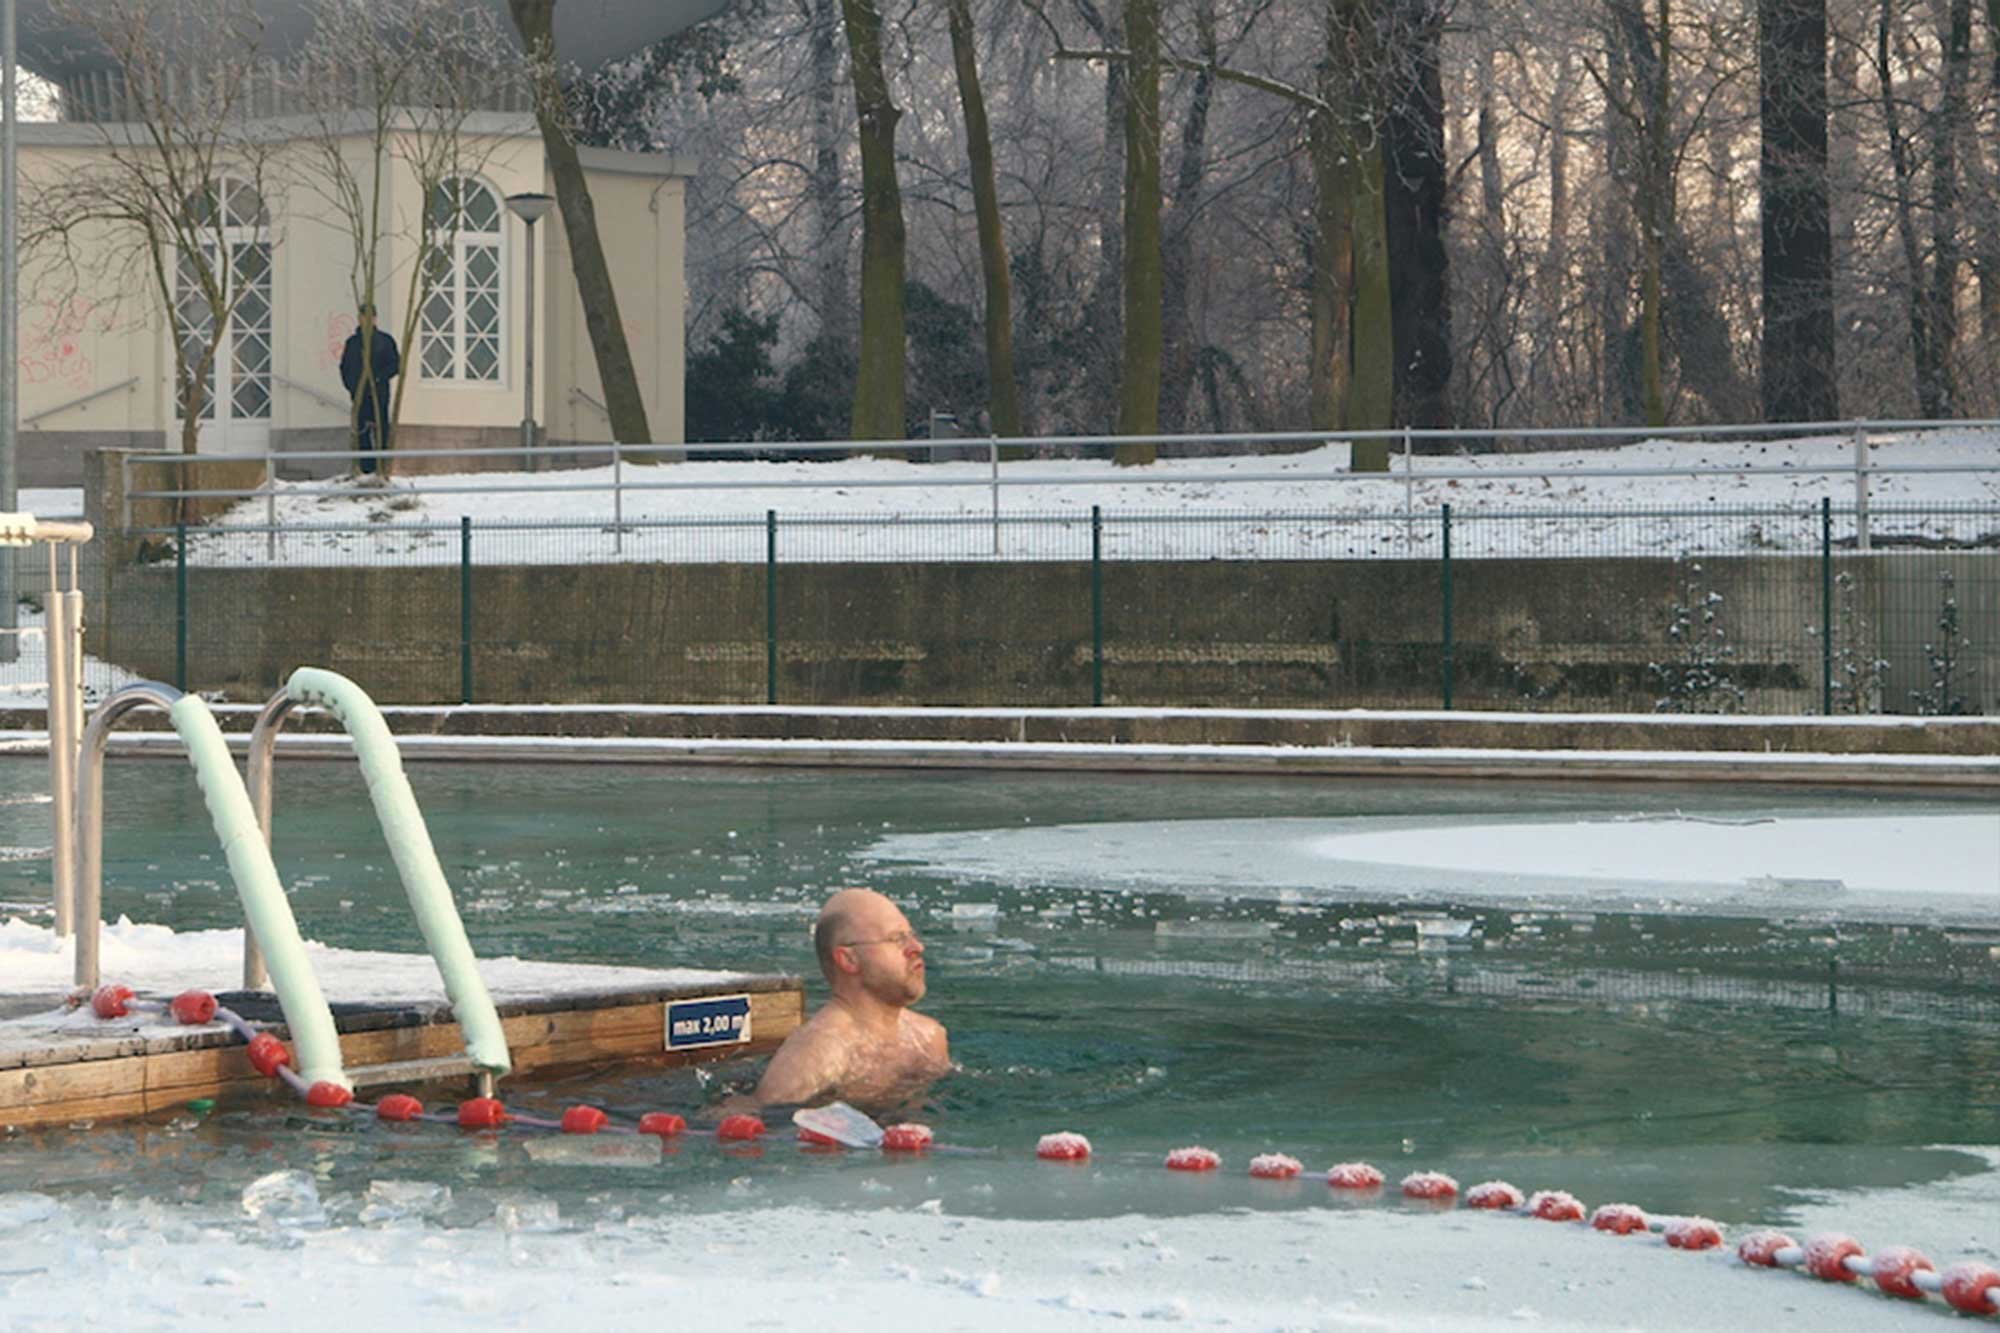  It’s possible to swim all year round in an unheated swimming pond. 